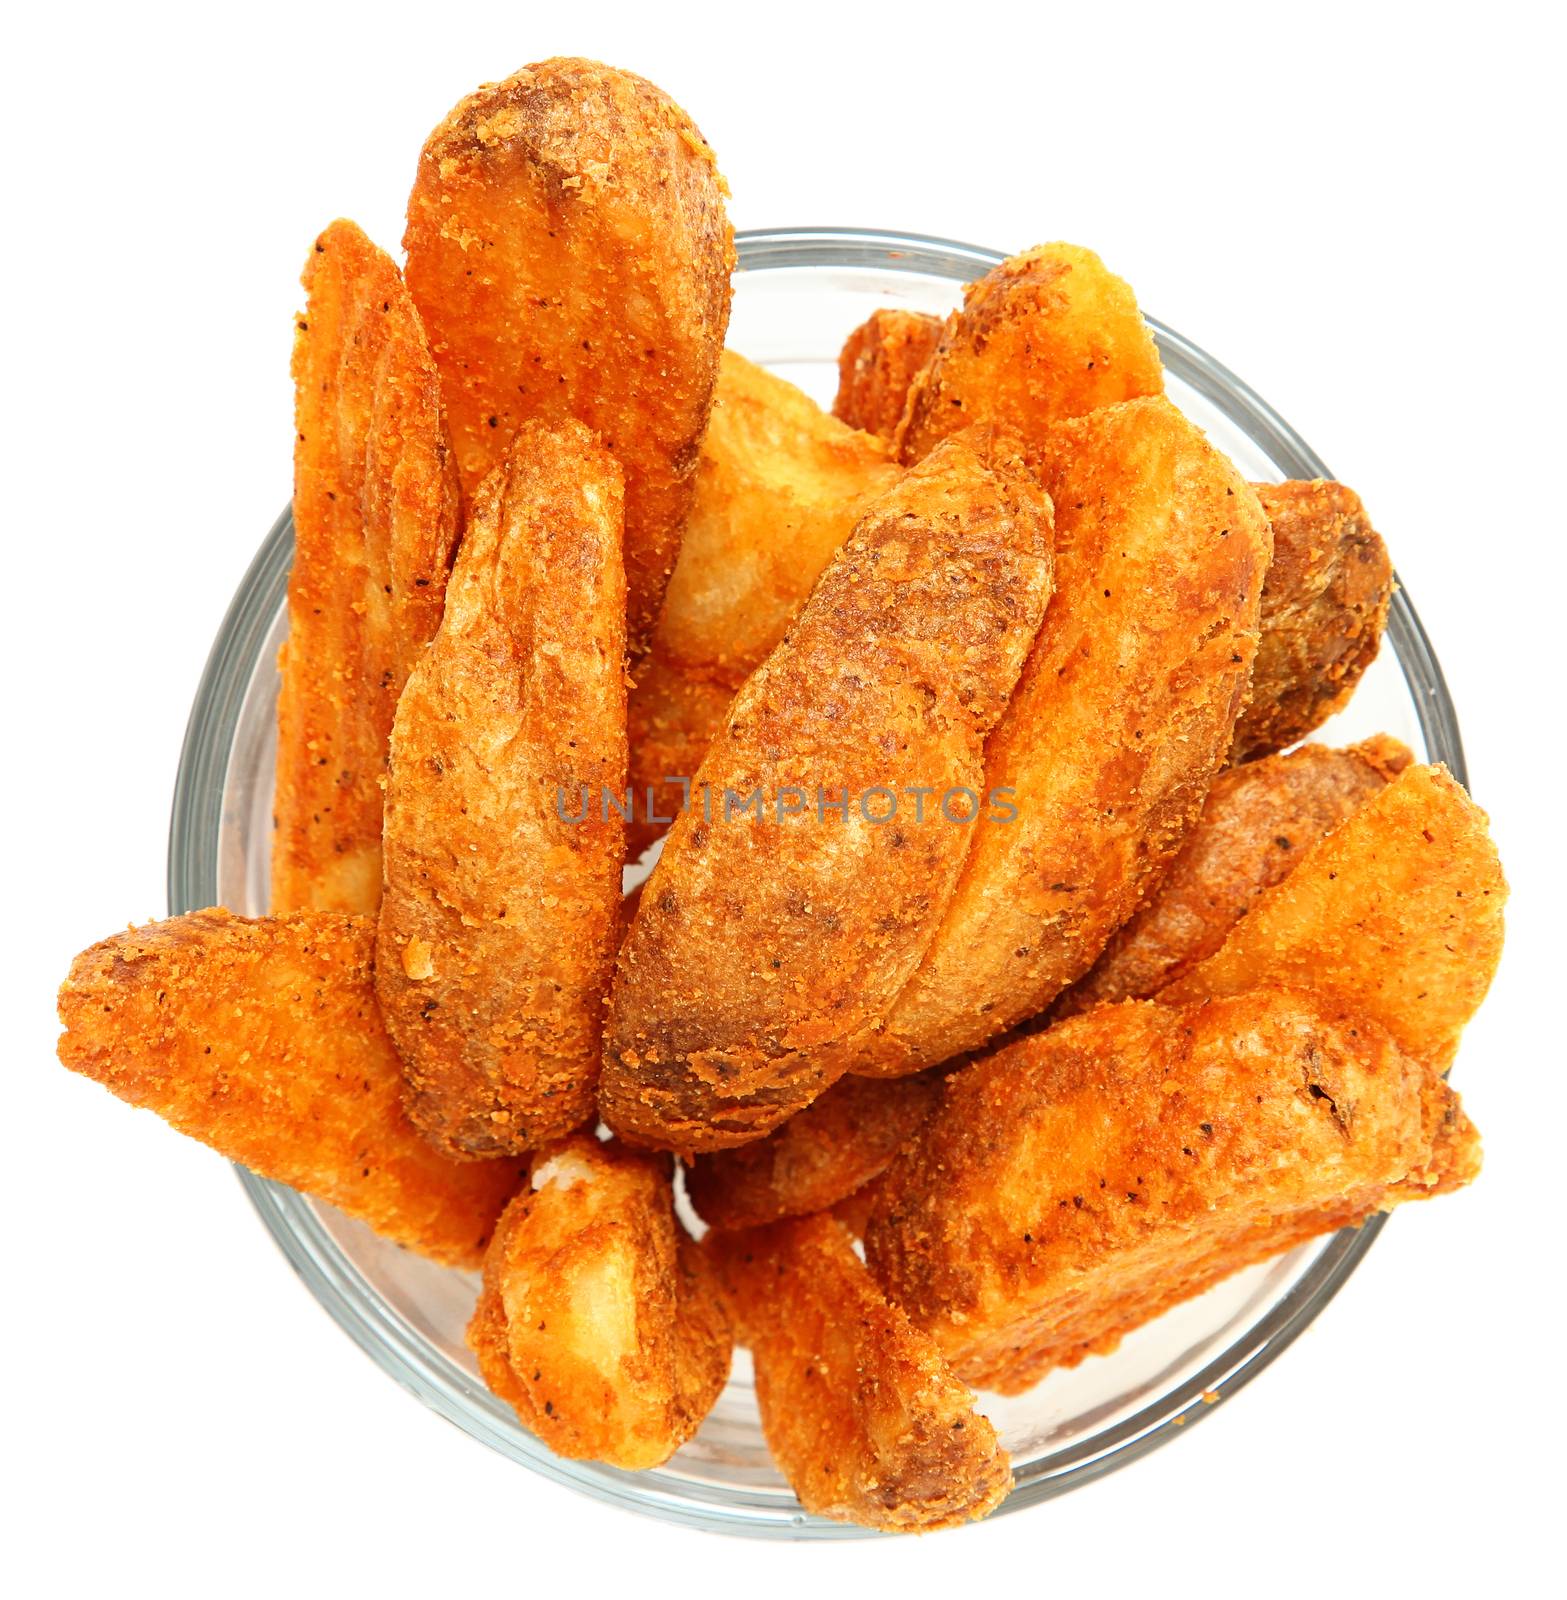 Spicy Potato Wedges in Glass Bowl Isolated Over White